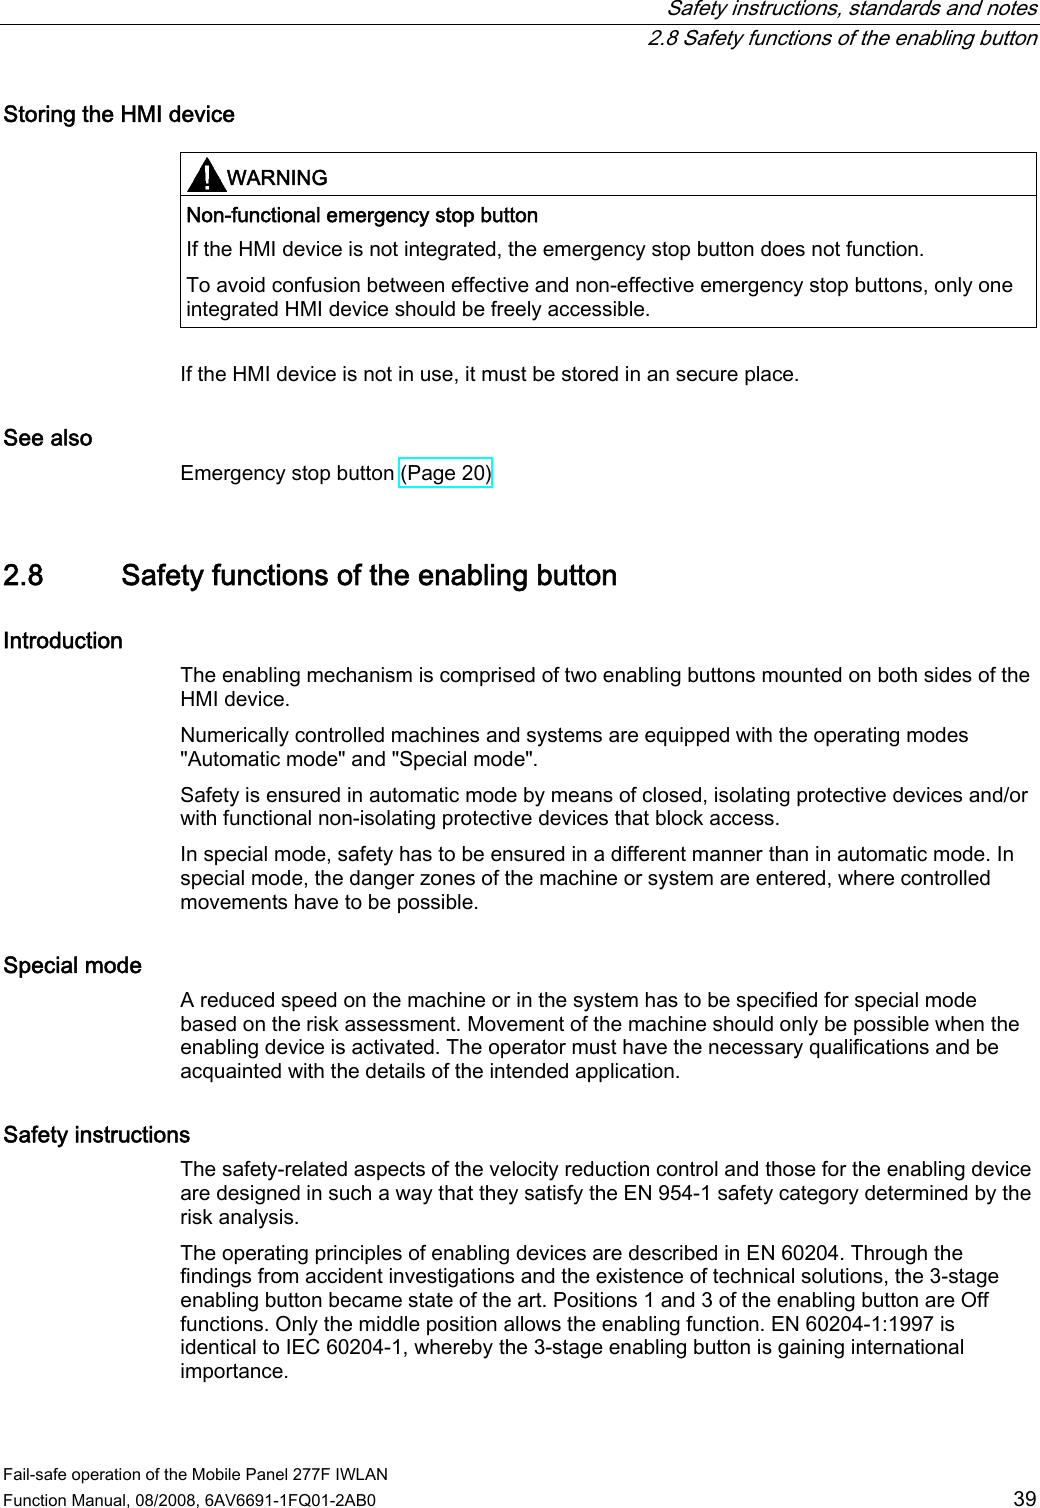   Safety instructions, standards and notes   2.8 Safety functions of the enabling button Fail-safe operation of the Mobile Panel 277F IWLAN  Function Manual, 08/2008, 6AV6691-1FQ01-2AB0  39 Storing the HMI device  WARNING  Non-functional emergency stop button If the HMI device is not integrated, the emergency stop button does not function. To avoid confusion between effective and non-effective emergency stop buttons, only one integrated HMI device should be freely accessible.  If the HMI device is not in use, it must be stored in an secure place. See also Emergency stop button (Page 20) 2.8 Safety functions of the enabling button Introduction The enabling mechanism is comprised of two enabling buttons mounted on both sides of the HMI device. Numerically controlled machines and systems are equipped with the operating modes &quot;Automatic mode&quot; and &quot;Special mode&quot;. Safety is ensured in automatic mode by means of closed, isolating protective devices and/or with functional non-isolating protective devices that block access. In special mode, safety has to be ensured in a different manner than in automatic mode. In special mode, the danger zones of the machine or system are entered, where controlled movements have to be possible. Special mode A reduced speed on the machine or in the system has to be specified for special mode based on the risk assessment. Movement of the machine should only be possible when the enabling device is activated. The operator must have the necessary qualifications and be acquainted with the details of the intended application. Safety instructions The safety-related aspects of the velocity reduction control and those for the enabling device are designed in such a way that they satisfy the EN 954-1 safety category determined by the risk analysis. The operating principles of enabling devices are described in EN 60204. Through the findings from accident investigations and the existence of technical solutions, the 3-stage enabling button became state of the art. Positions 1 and 3 of the enabling button are Off functions. Only the middle position allows the enabling function. EN 60204-1:1997 is identical to IEC 60204-1, whereby the 3-stage enabling button is gaining international importance. 